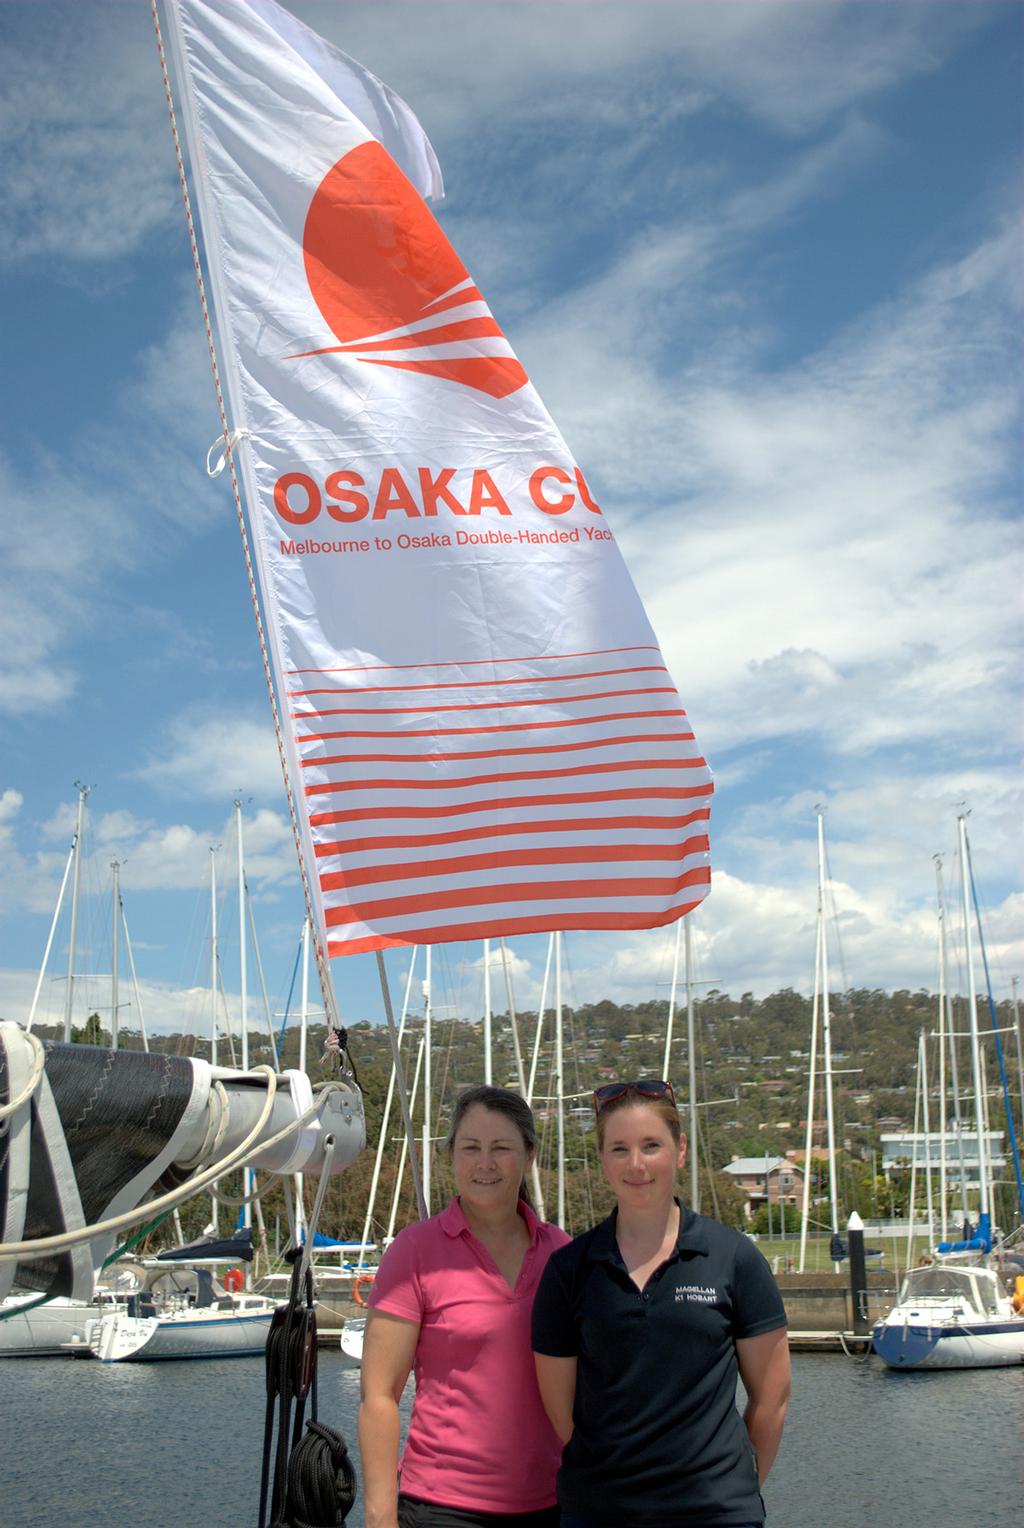 All women crew of Morning Star, Joanna Harpur (left) and Jo Breen with the Osaka Cup flag. © SW